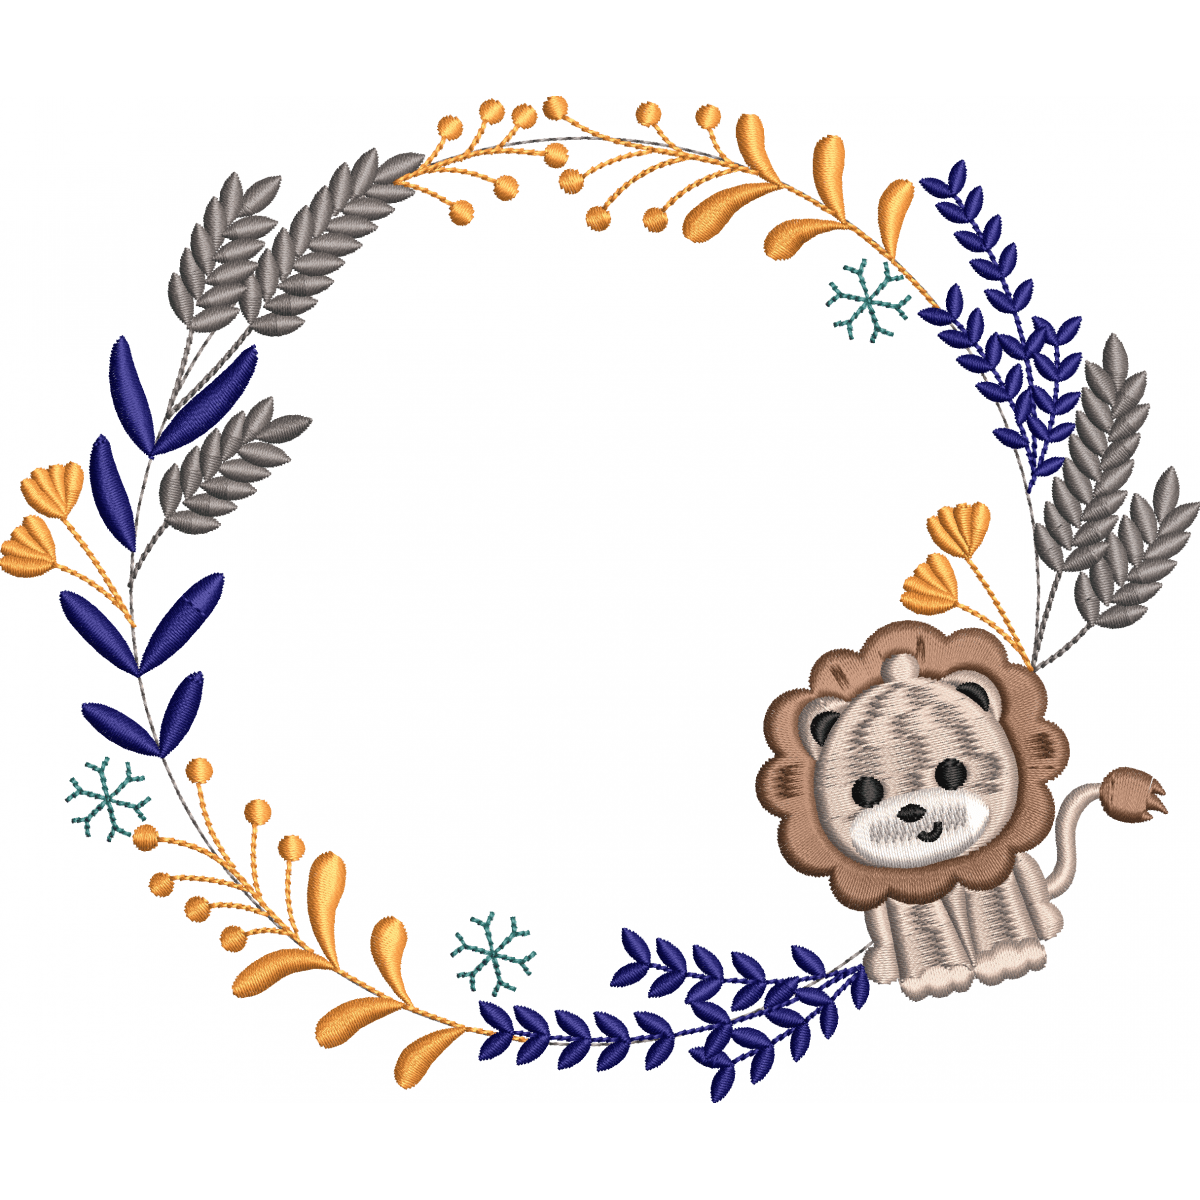 Wreath 166f with wheat spike lion